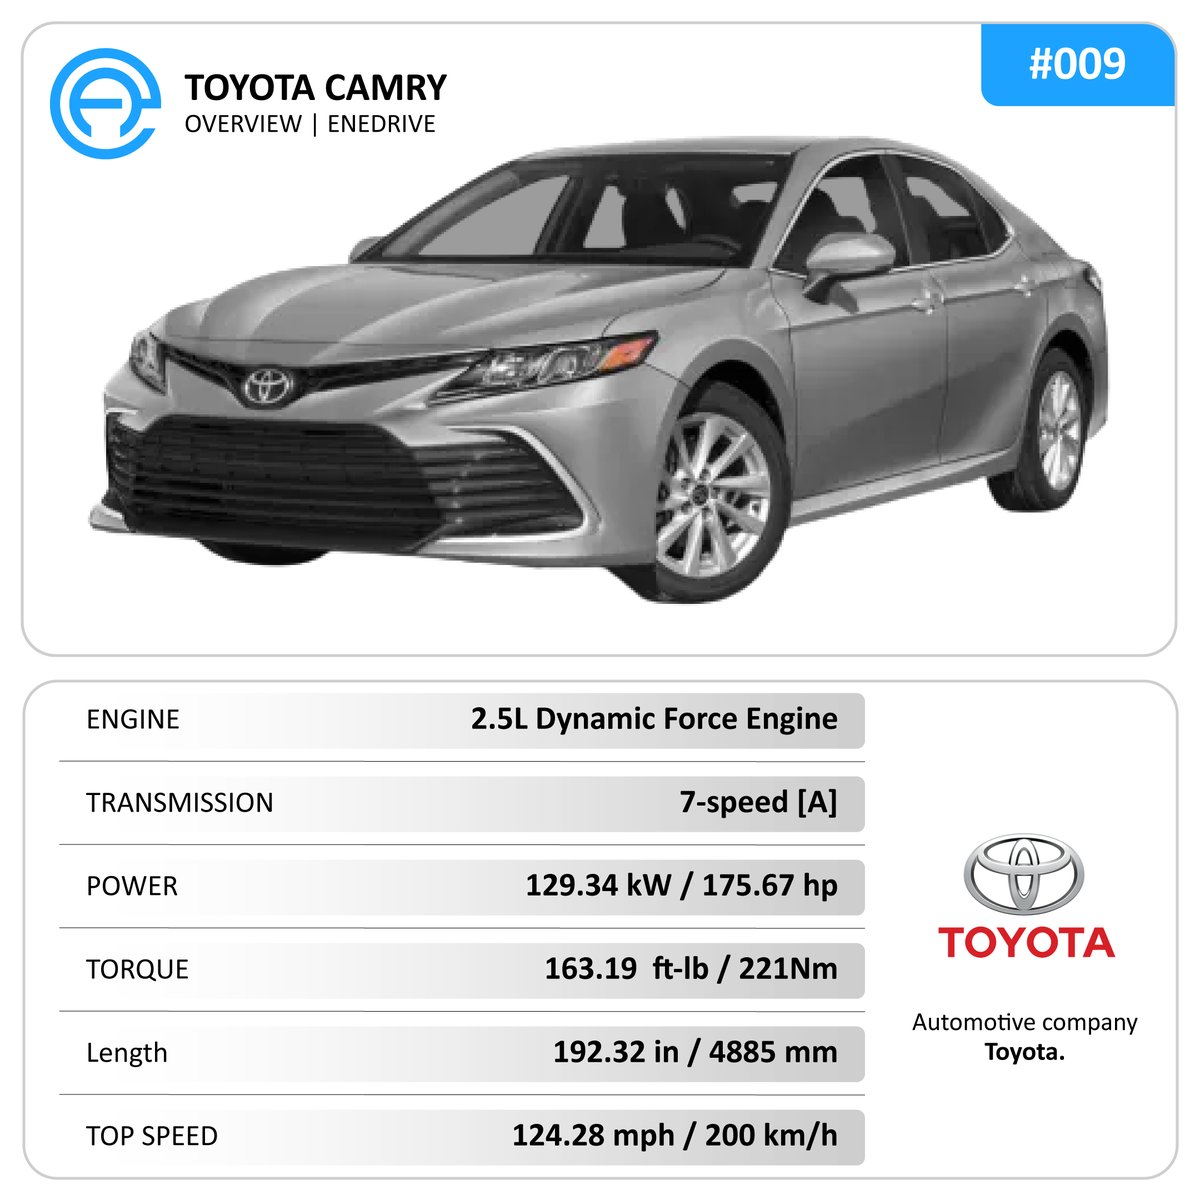 Let us know your thoughts about the new TOYOTA CAMRY.
.
•
#ToyotaCamry
#CamryNation
#CamryLife
#ToyotaPerformance
#CamryLove
#ReliableRides
#LuxurySedan
#EfficiencyMatters
#ToyotaFamily
#SleekAndStylish
#CamryOwners
#ToyotaPower
#SmoothRide
#EfficientElegance